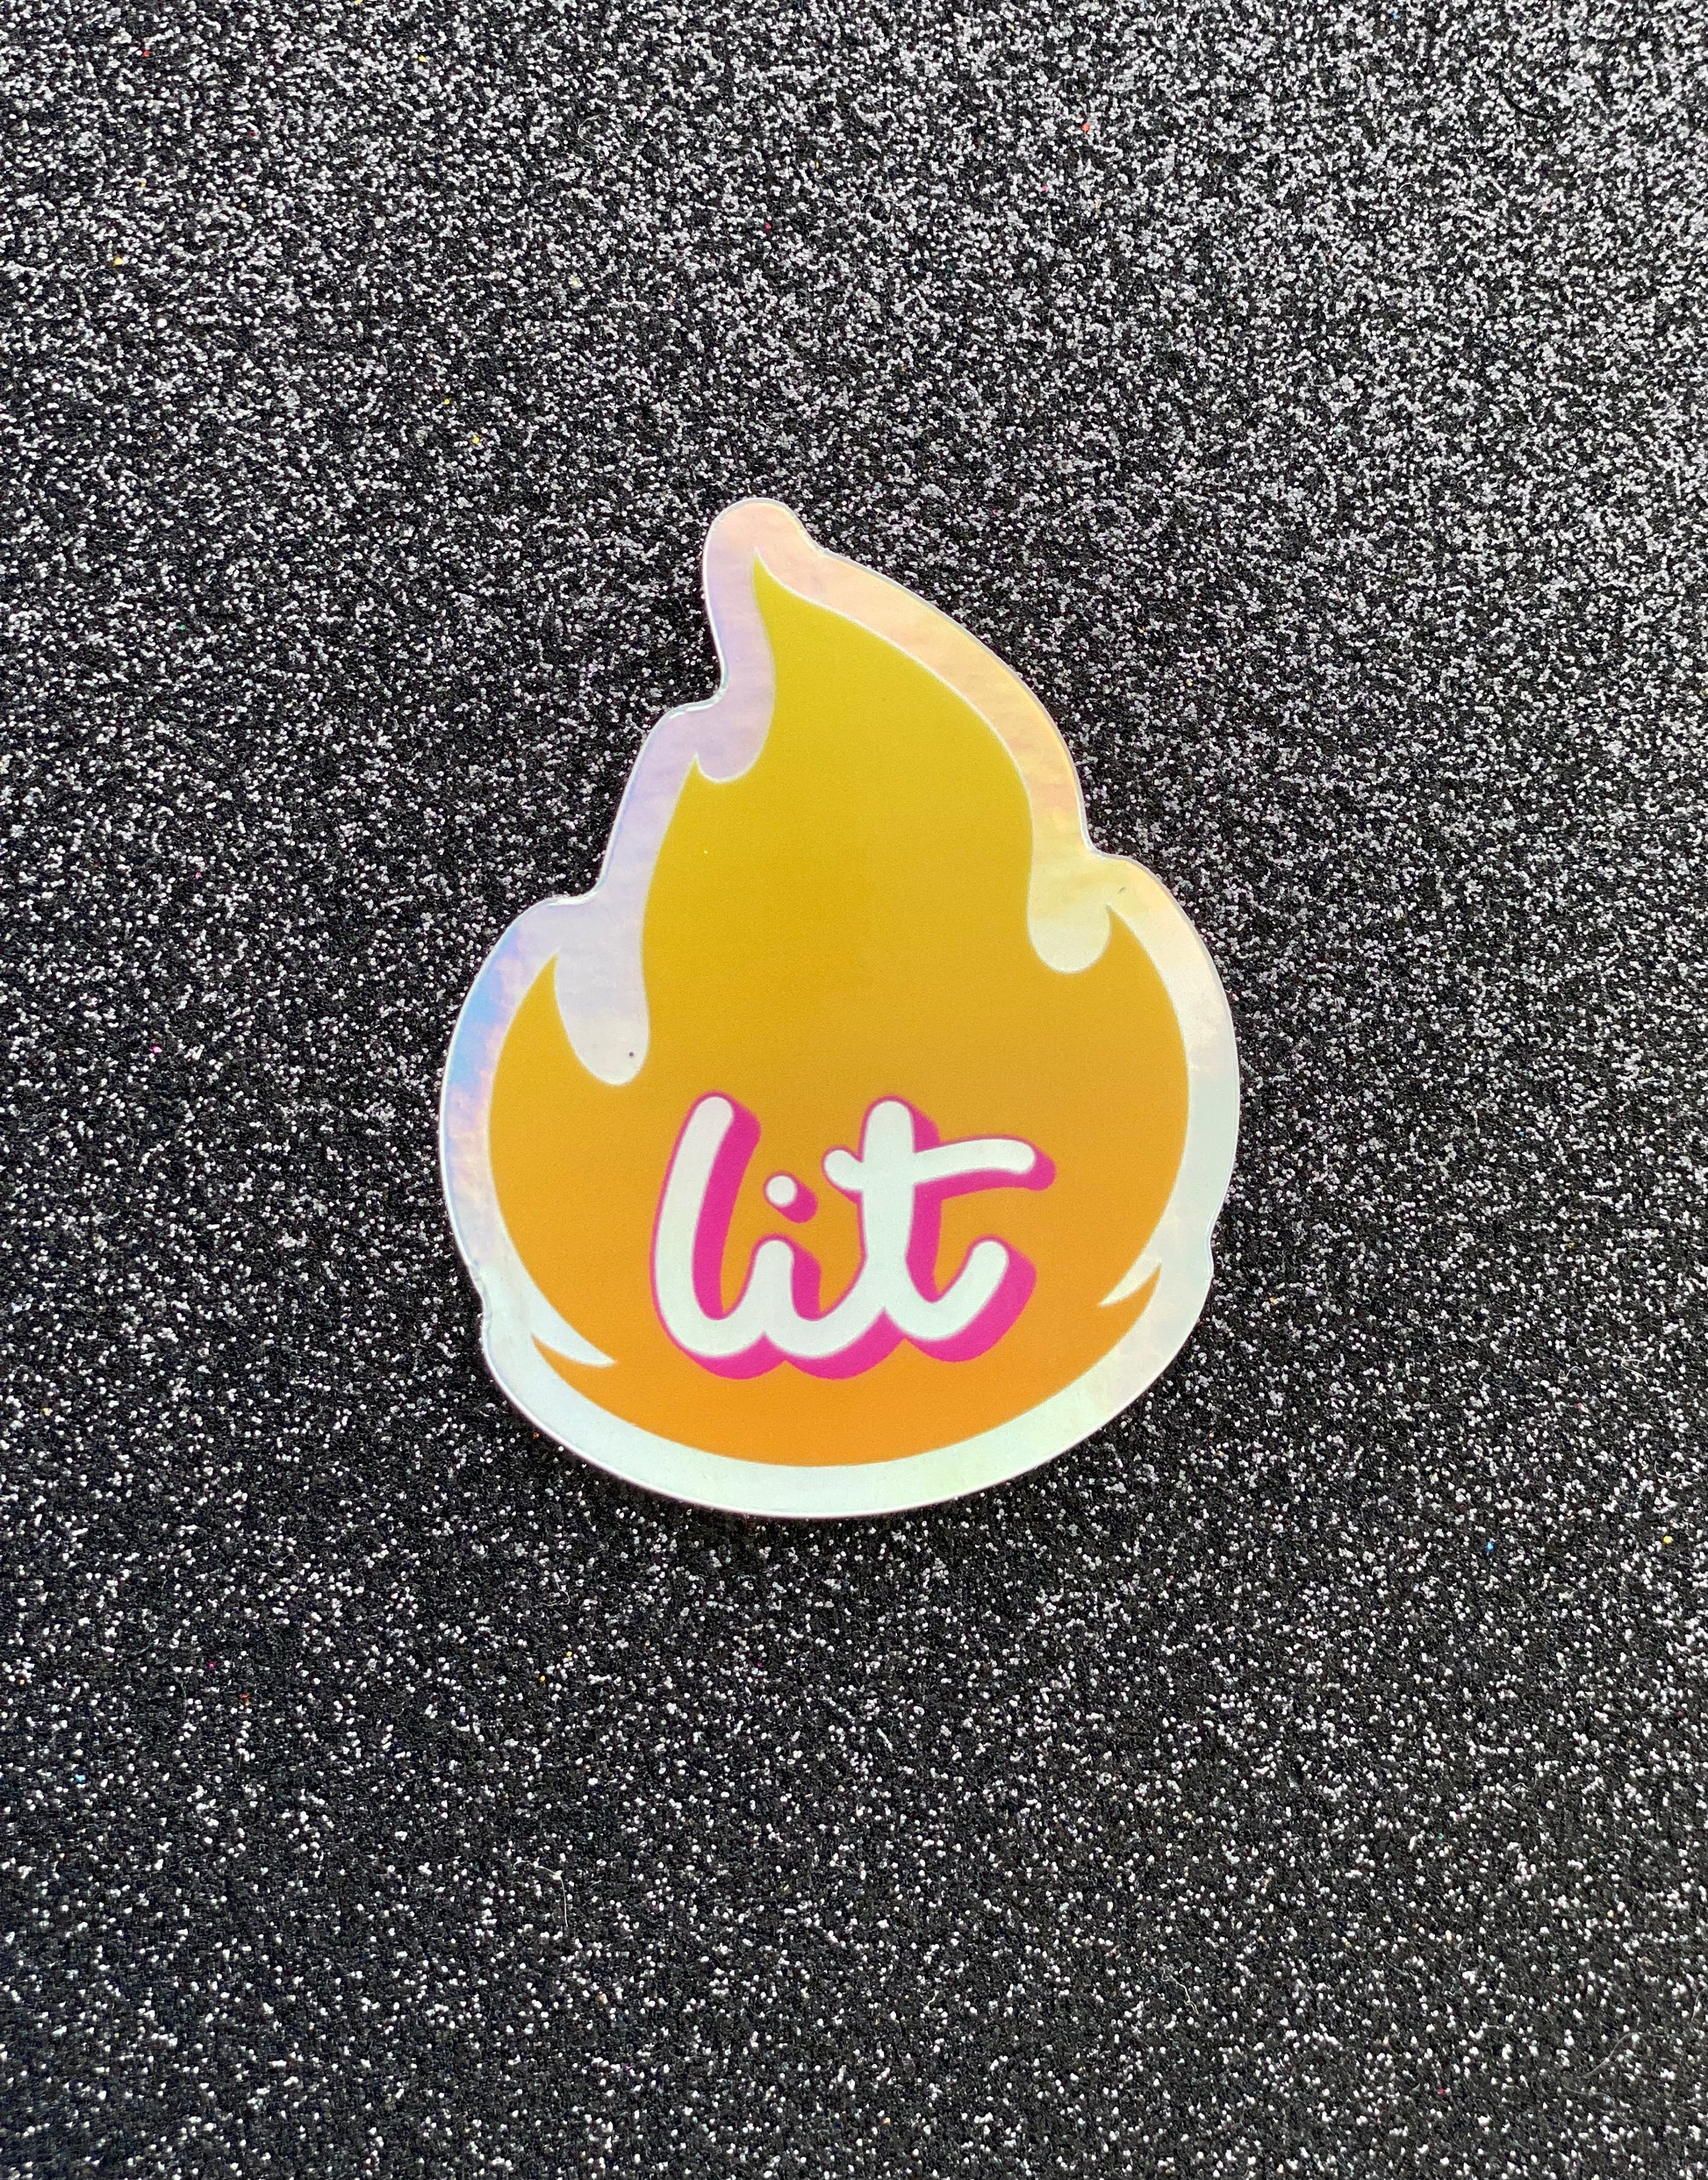 Two holographic stickers, one larger, one smaller. The sticker is an illustration of the "fire" emoji and inside is the word "lit" in script. The sticker sits on a black glitter background.